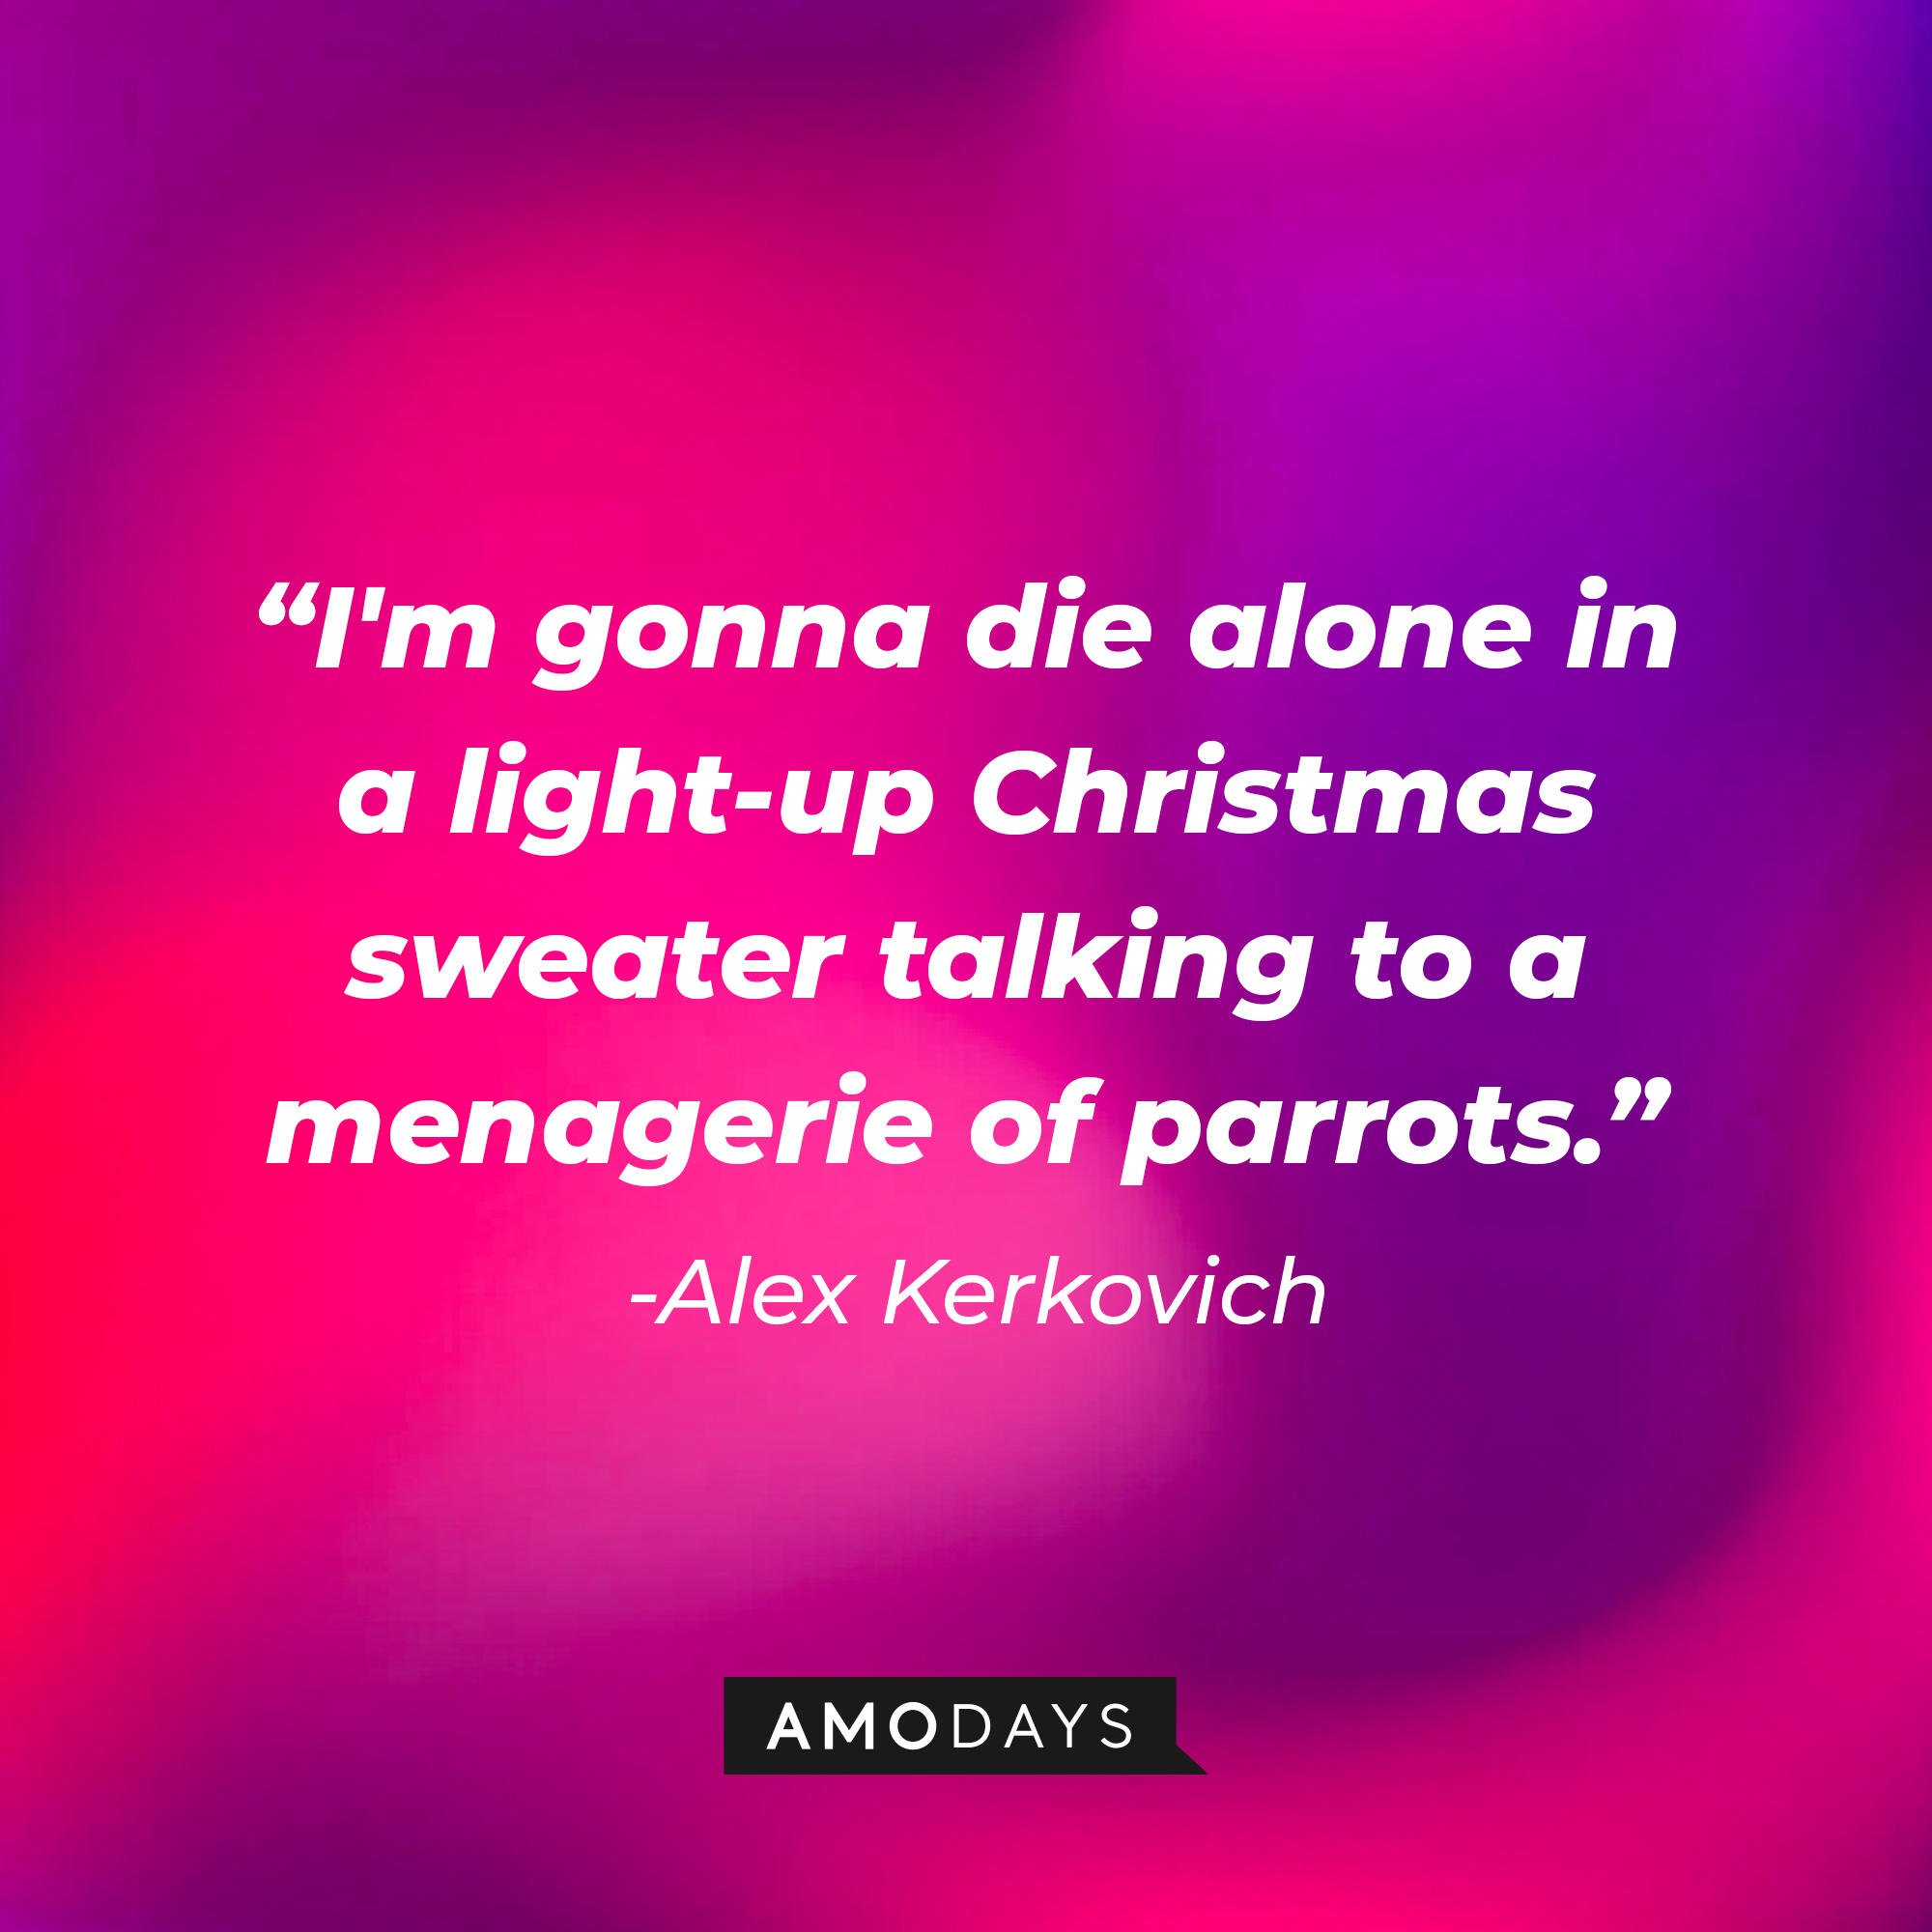 Penny Hartz's quote, "I'm gonna die alone in a light-up Christmas sweater talking to a menagerie of parrots." | Source: Facebook/HappyEndings